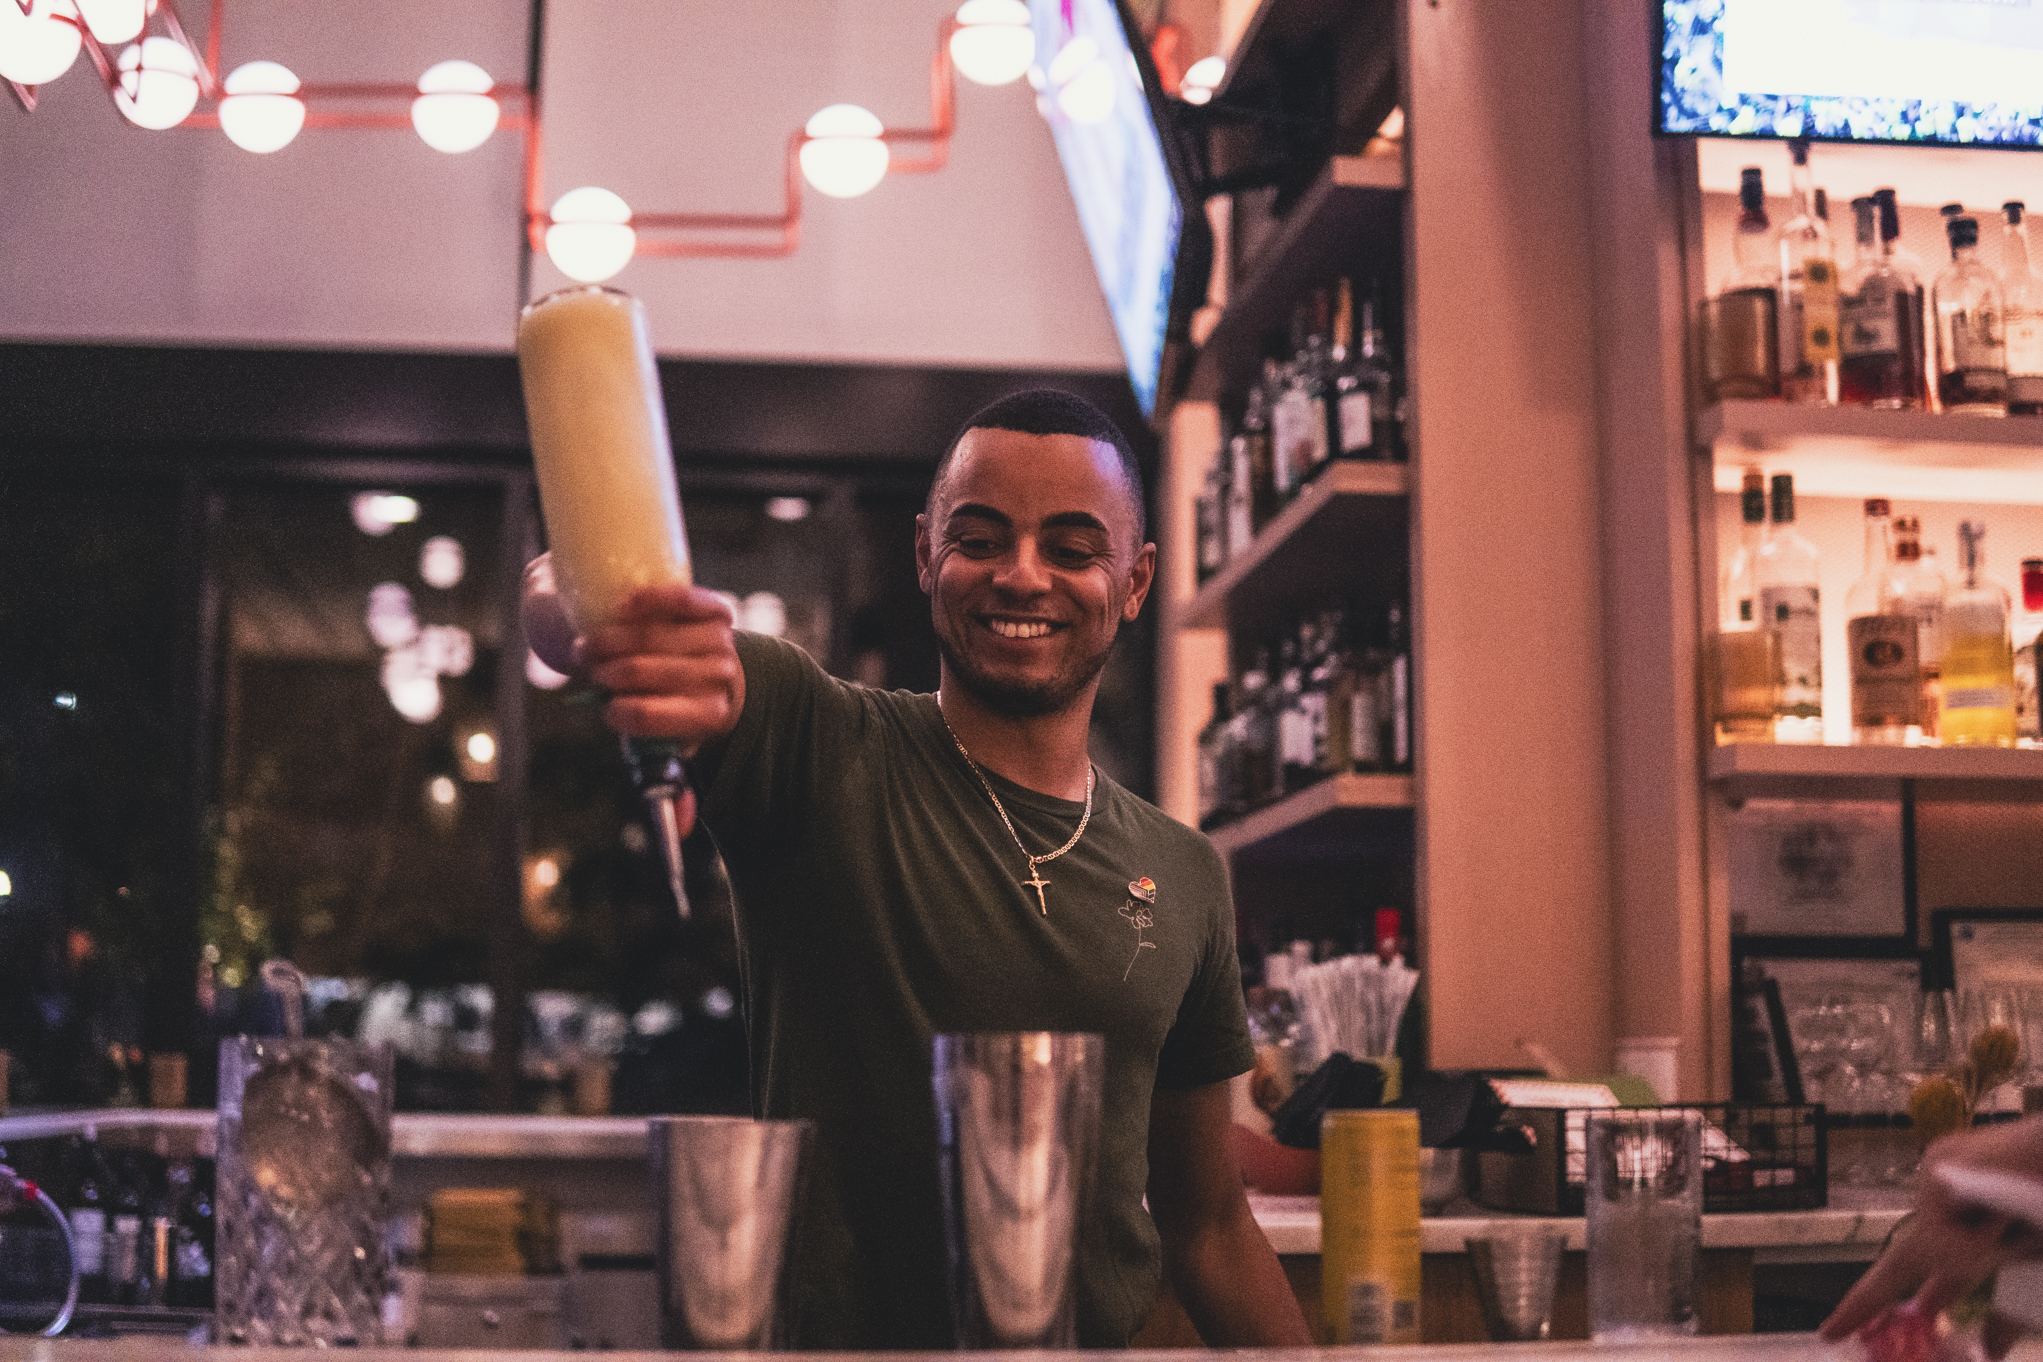 Bartending pouring a drink